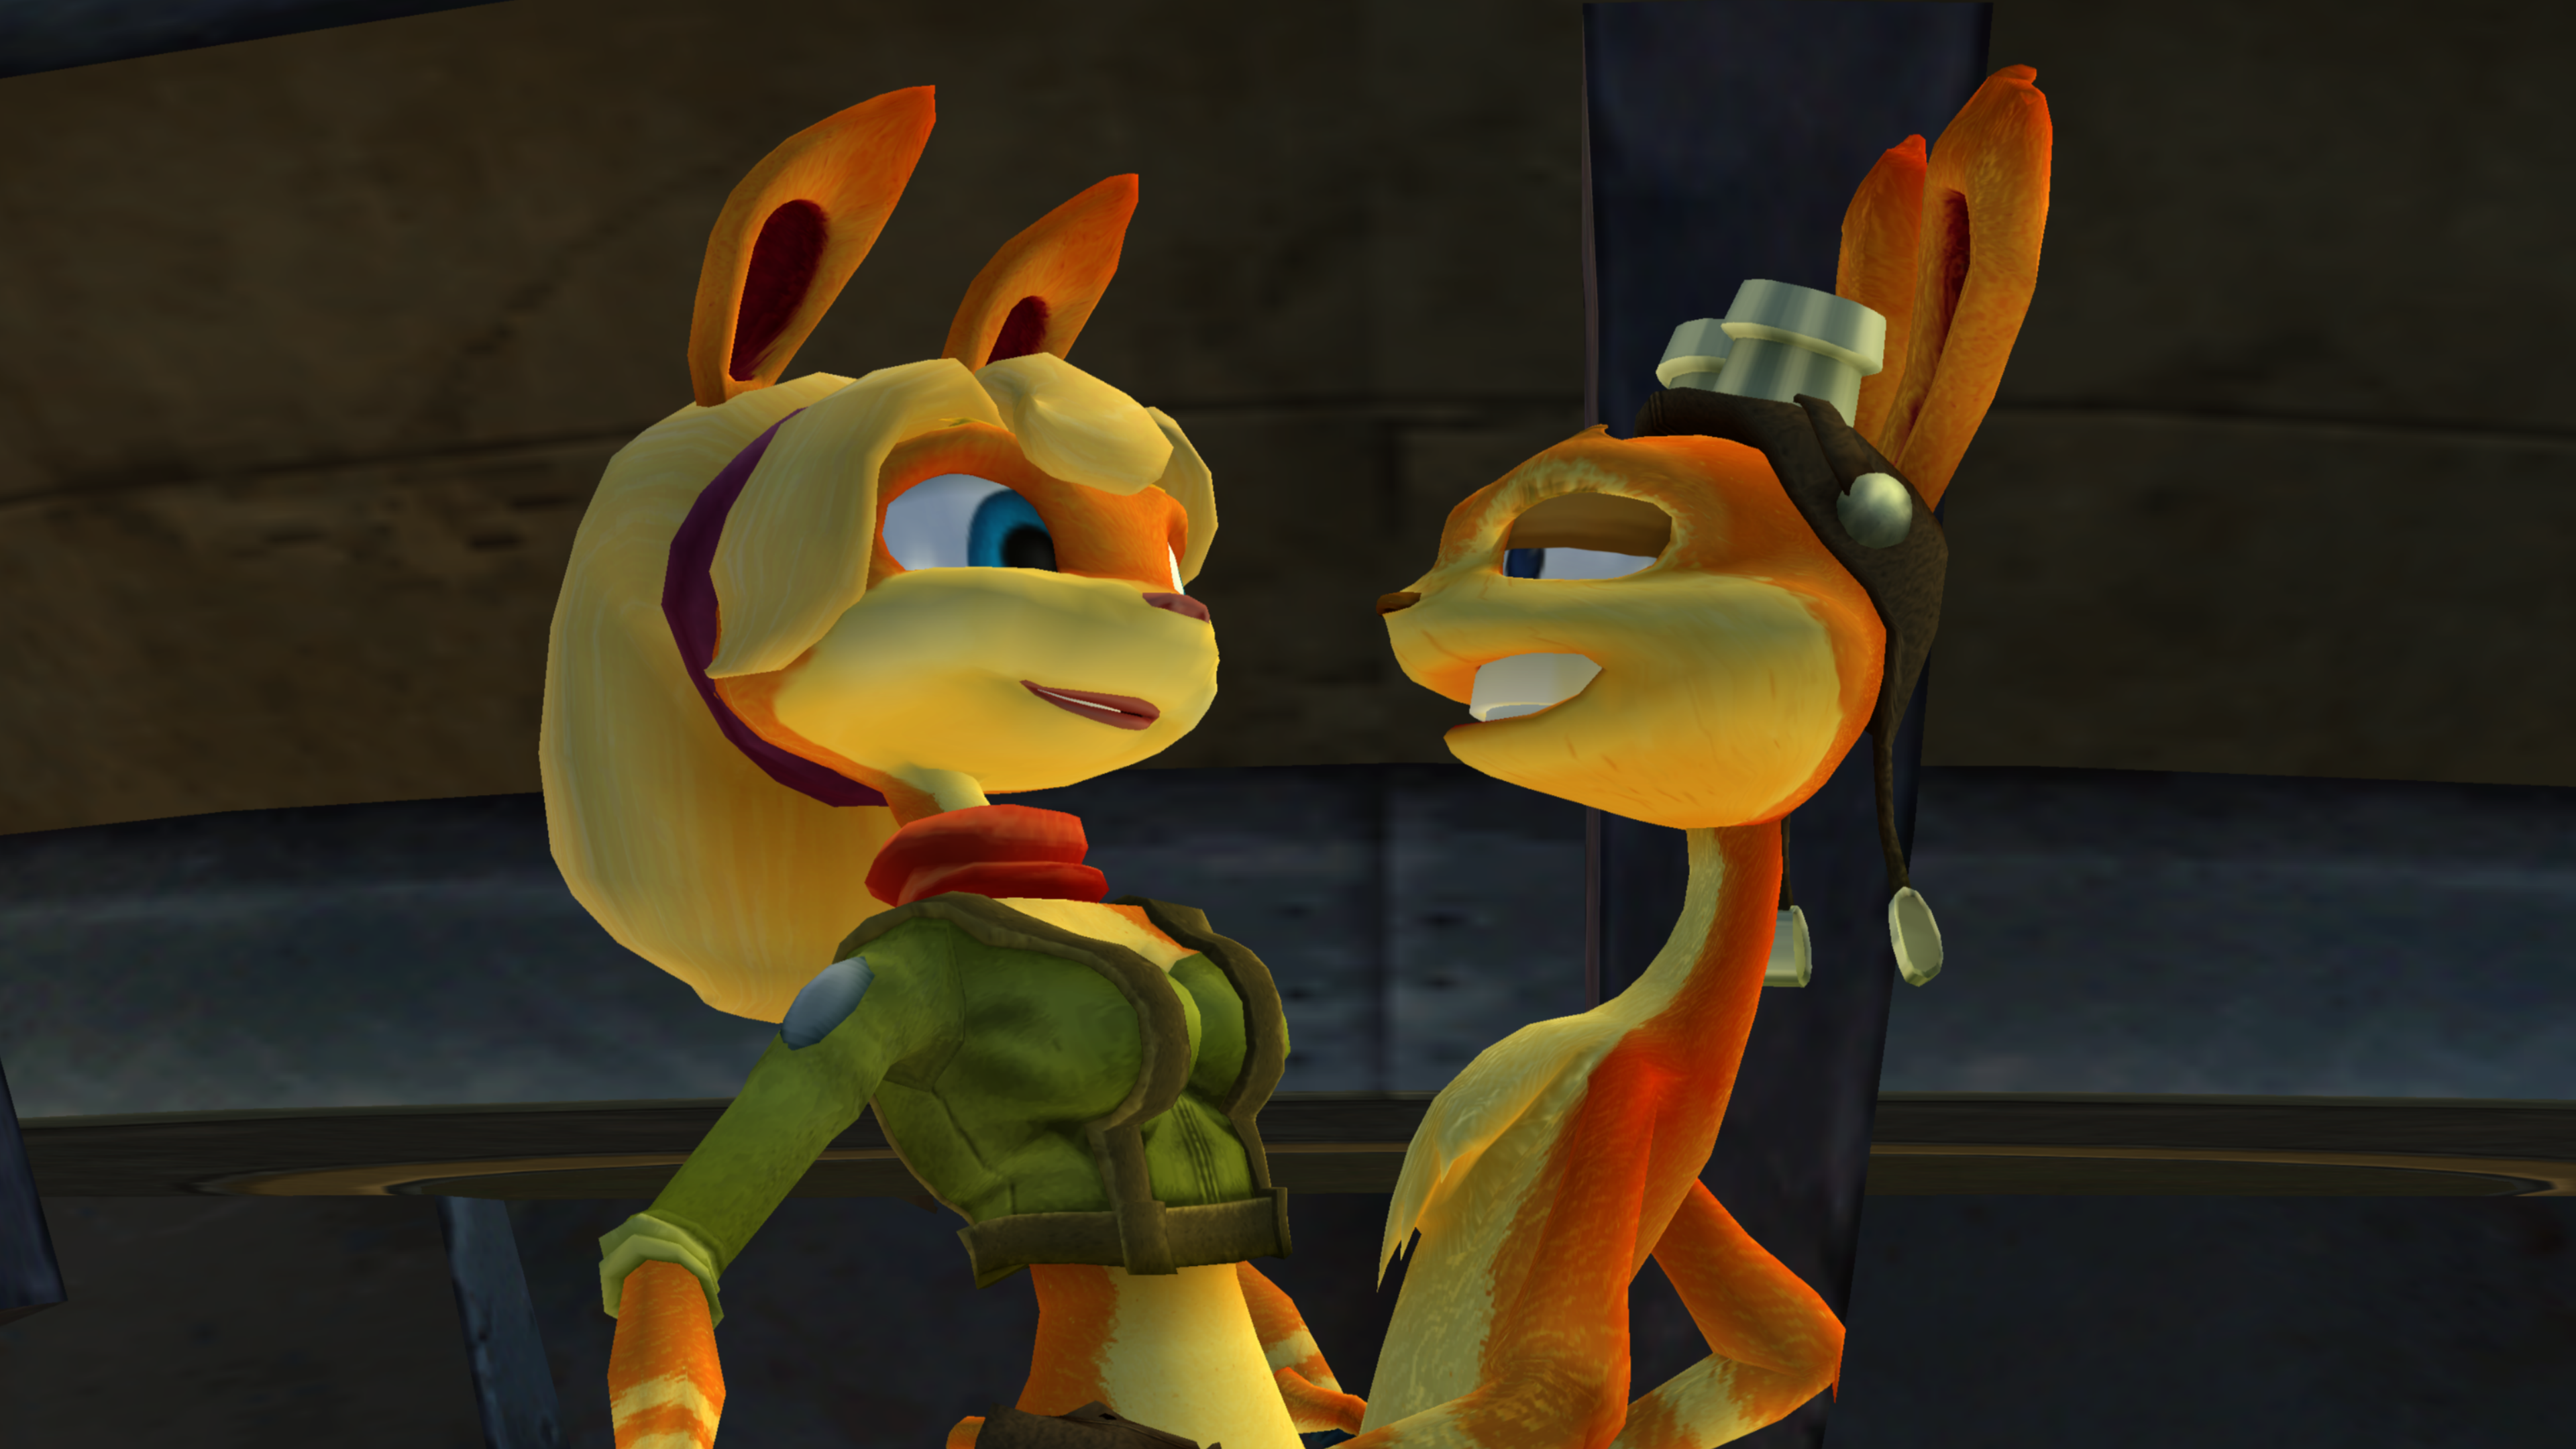 Video Porno Jack And Daxter 80